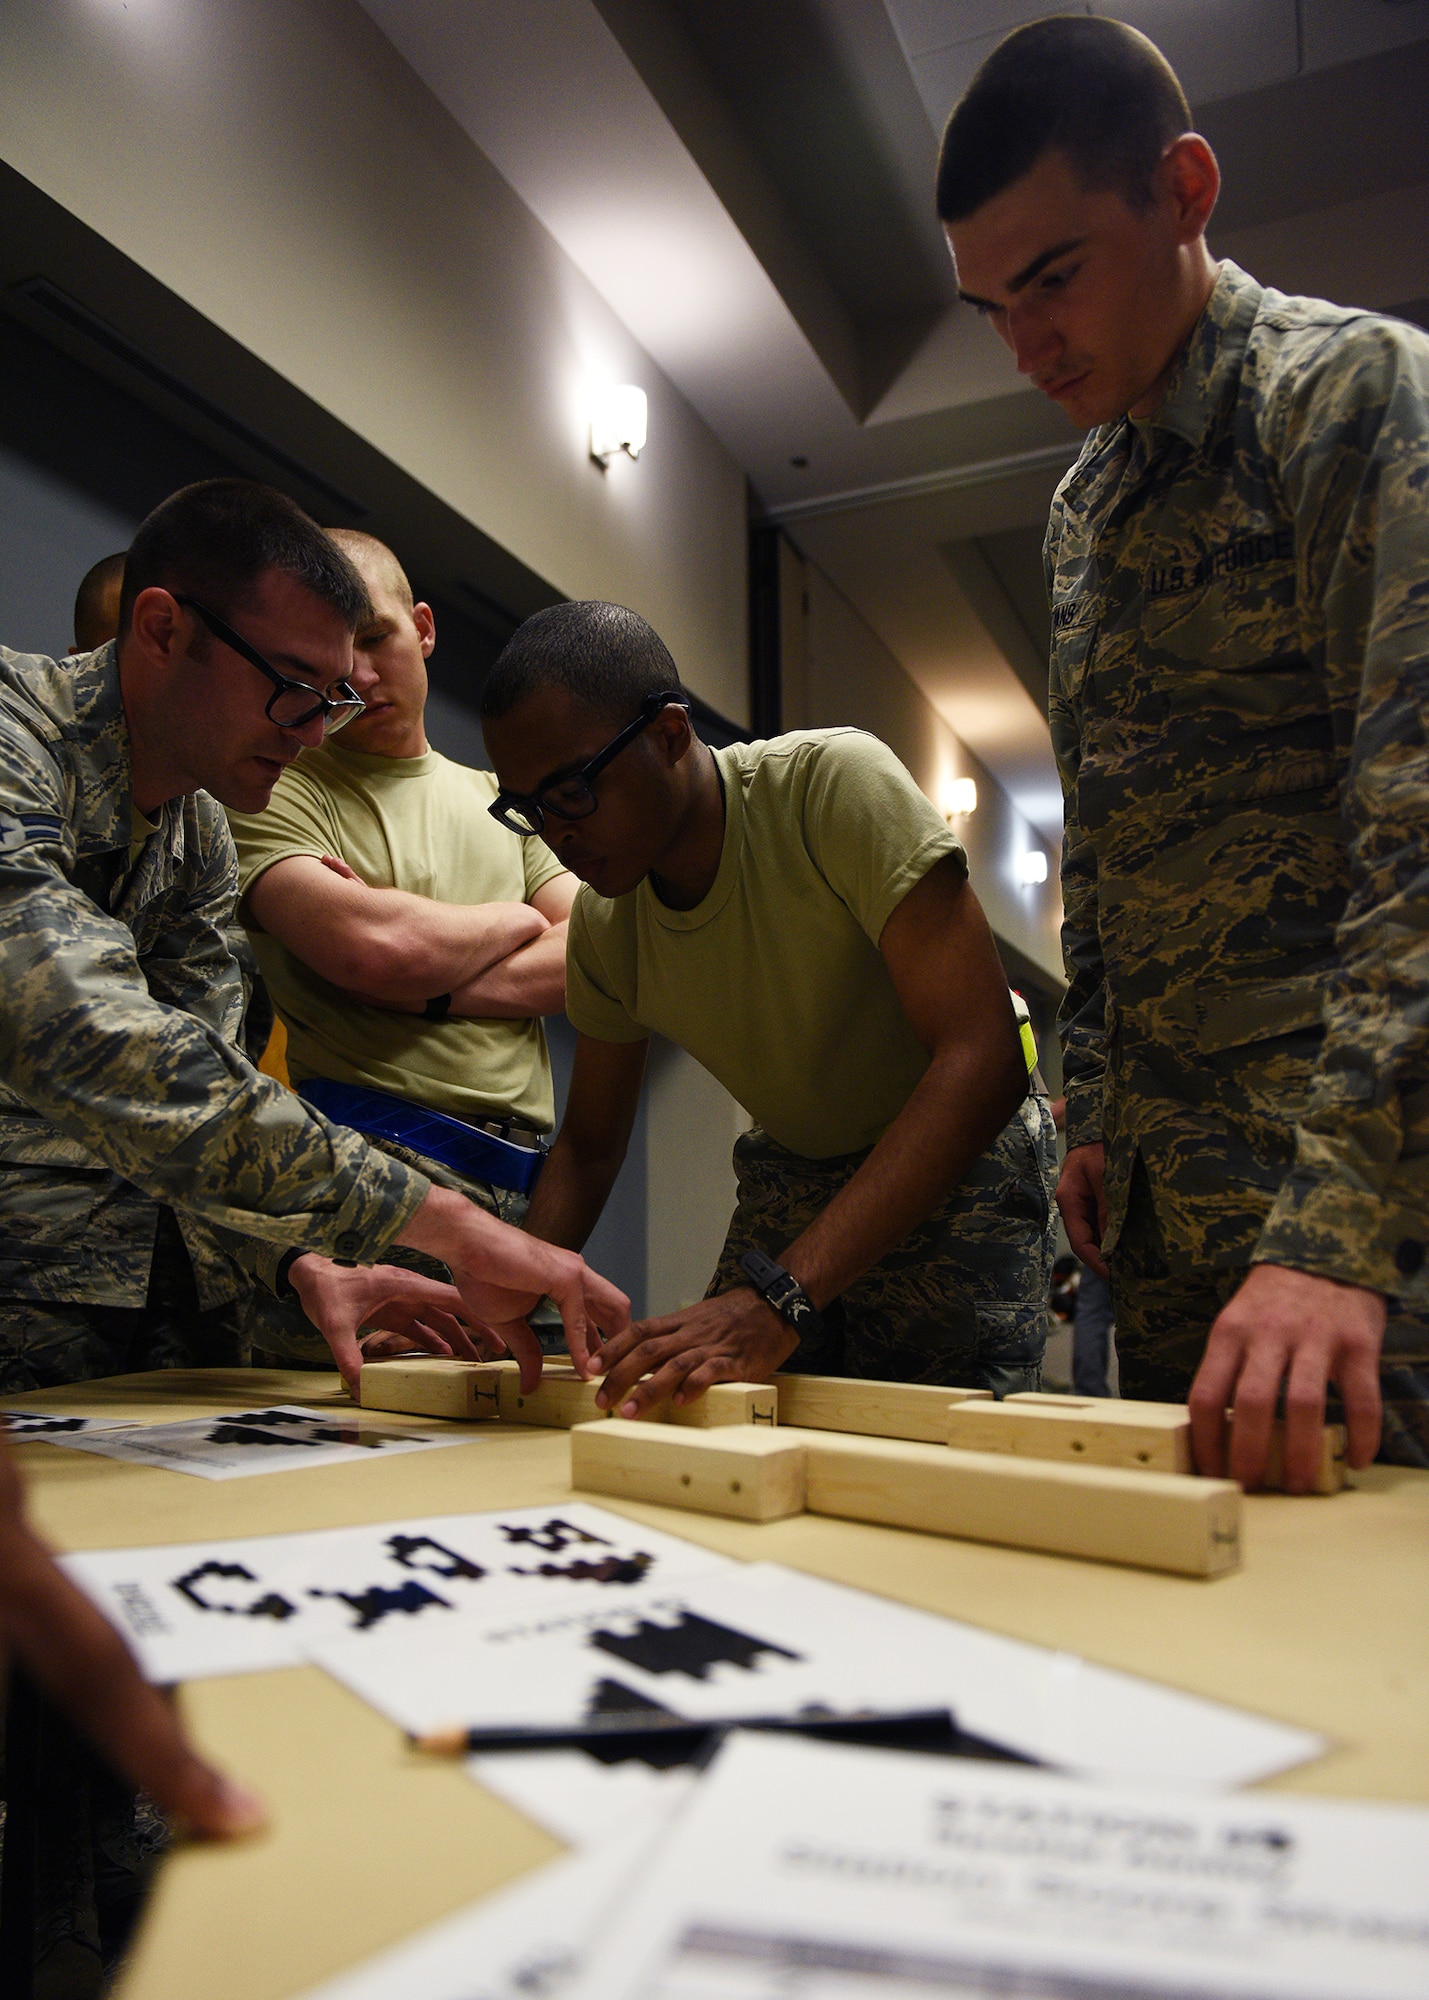 Participants of the Mental Fitness Obstacle Course work to complete a puzzle within the required time limit in conjunction with various callisthenic exercises at the event center on Goodfellow Air Force Base, Texas, July 2, 2019. The course was designed by the 17th Training Group to highlight the link between physical exertion and cognitive tasks for new technical training students. (U.S. Air Force photo by Staff Sgt. Chad Warren/Released)